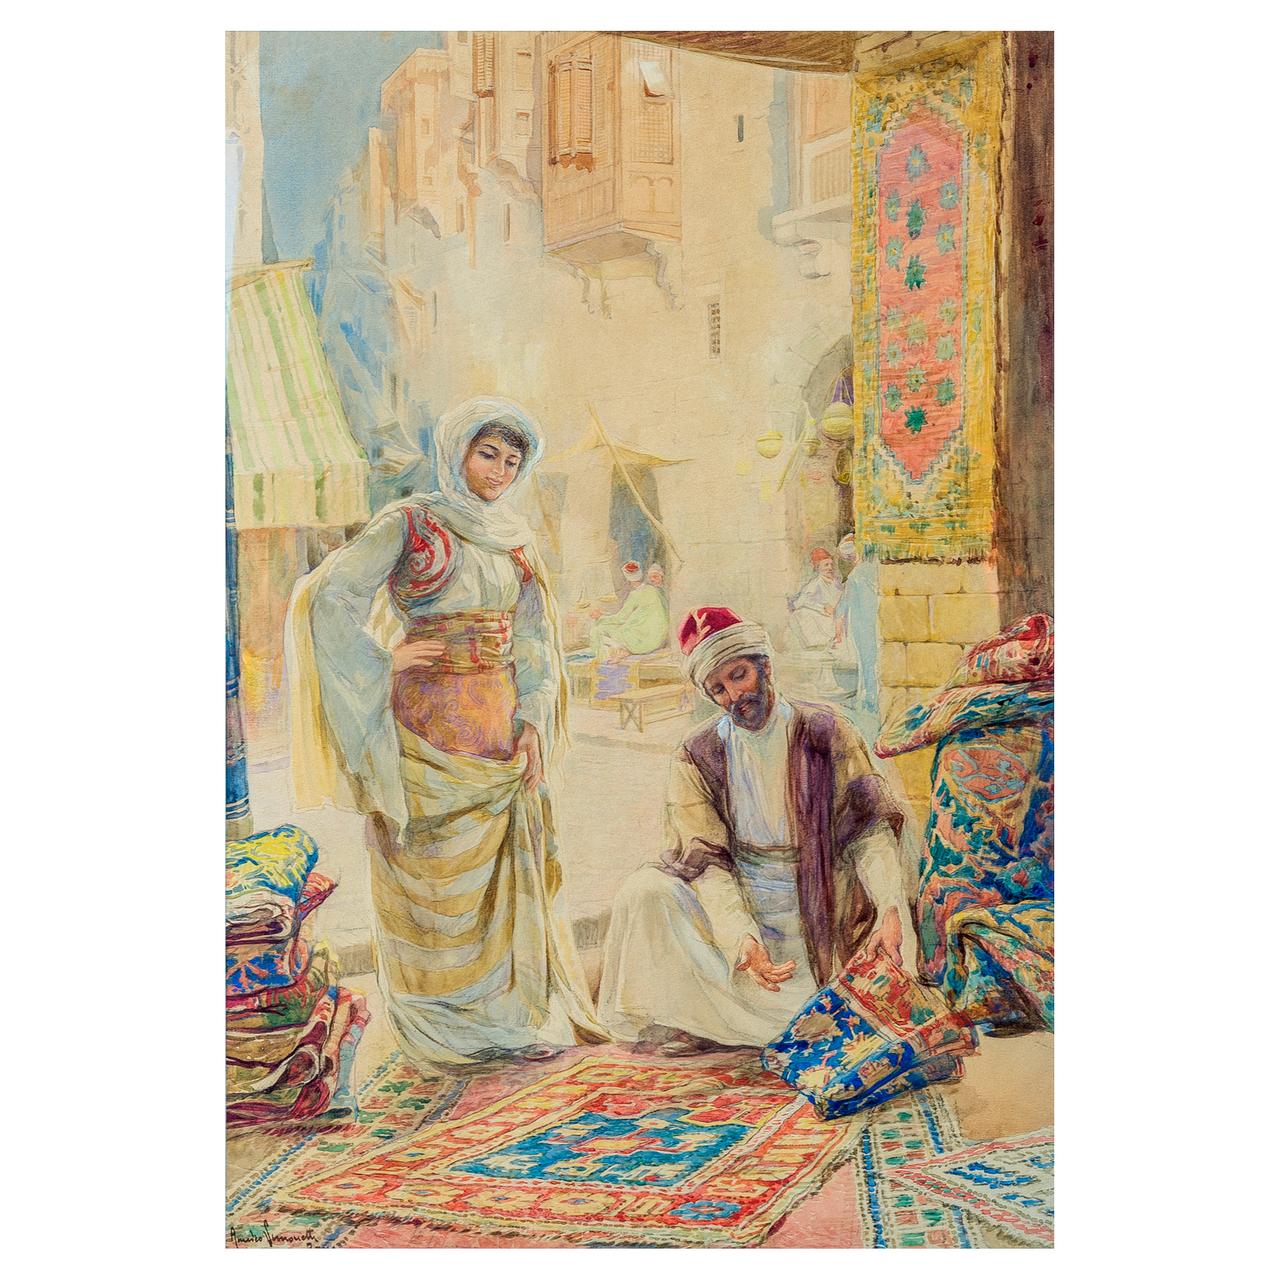 A fine pair of orientalist watercolor paintings depicting Rug Merchants by Amedeo Simonetti.

Maker: Amedeo Simonetti (1874-1922)
Origin: Italian
Date: 19th century
Medium: Watercolor
Dimension: 21 in. x 14 in. (image); 27 1/2 in. x 20 1/2 in.